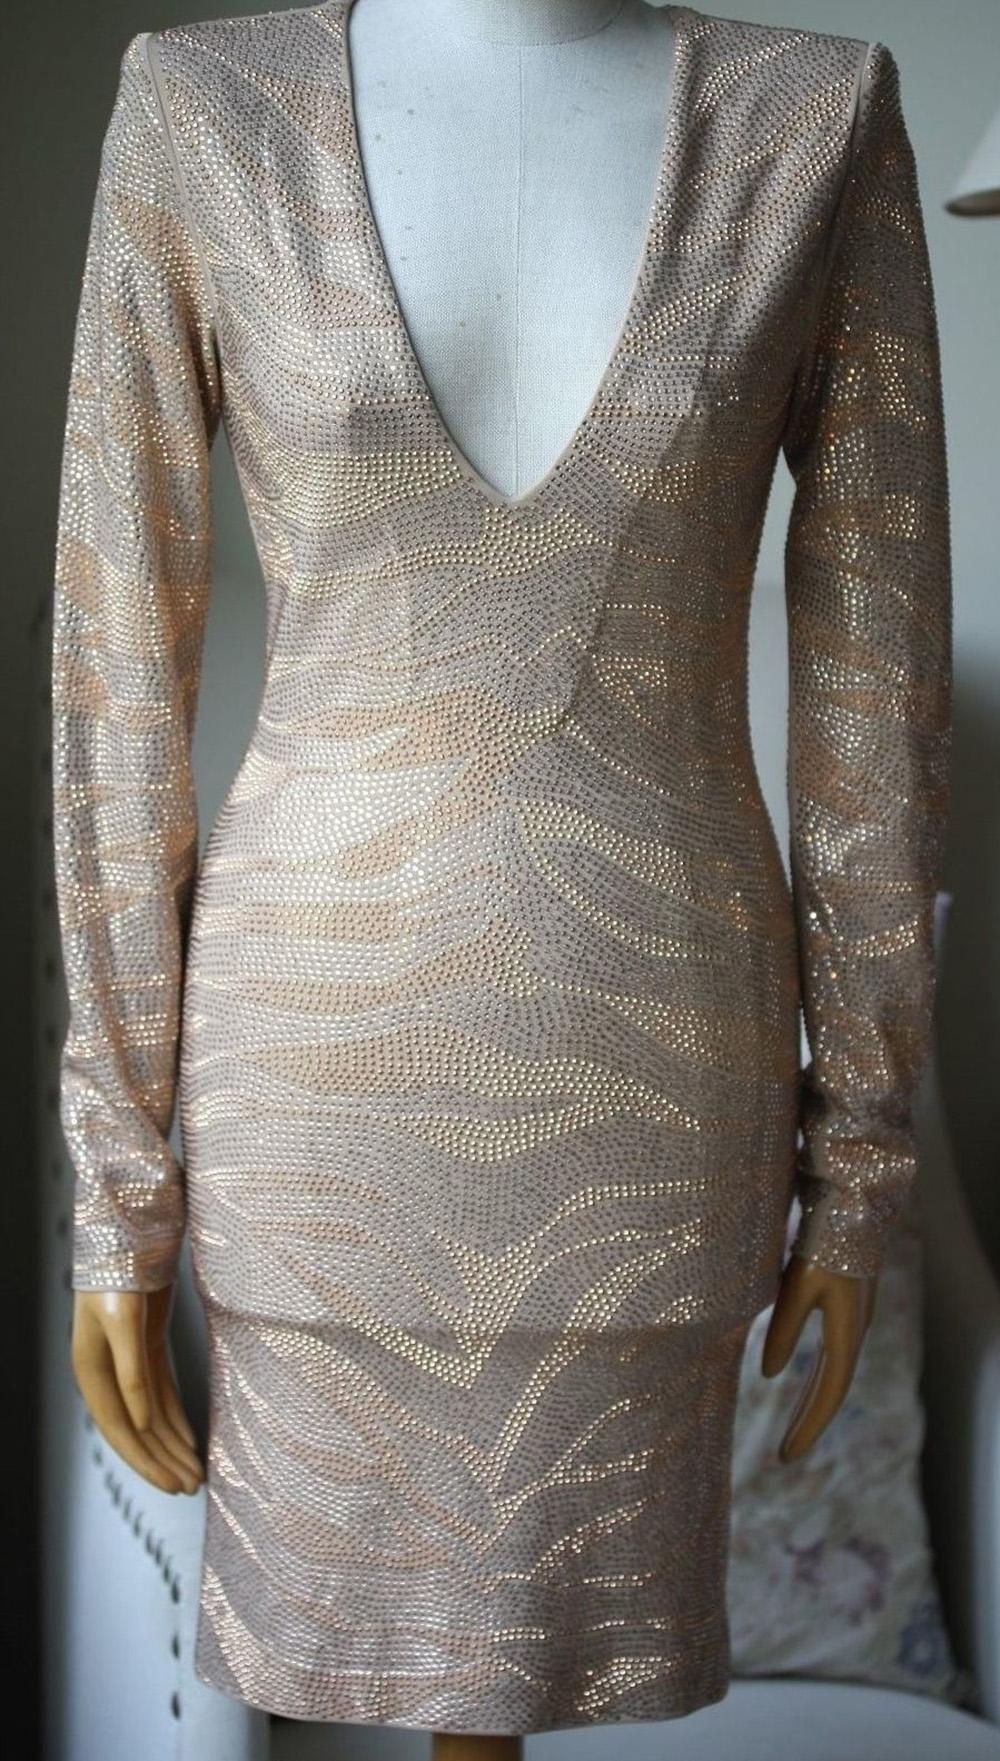 Balmain's long-sleeved beige mini dress is a major party piece. Covered in shimmering sequins to resemble a tiger motif, this silk-lined crepe piece has a close fit, a flattering V-neck and padded shoulders - a brand signature. 

Size: FR 36 (UK 8,